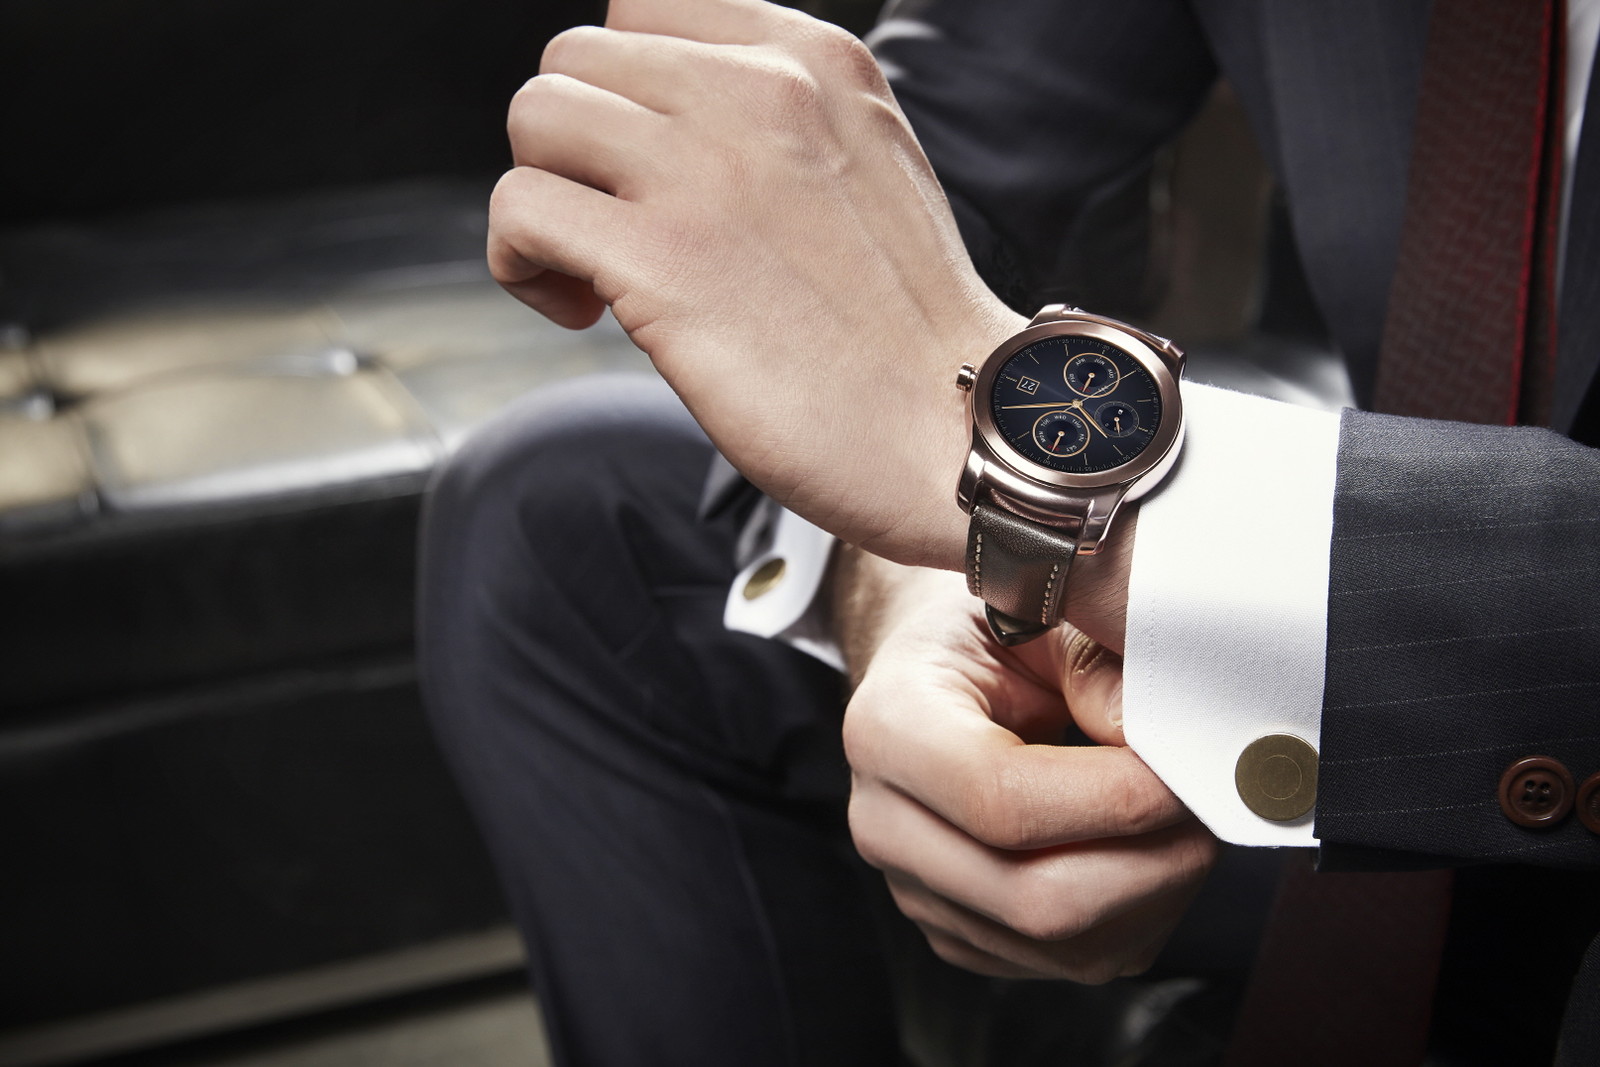 Wearing a Smartwatch with a Suit